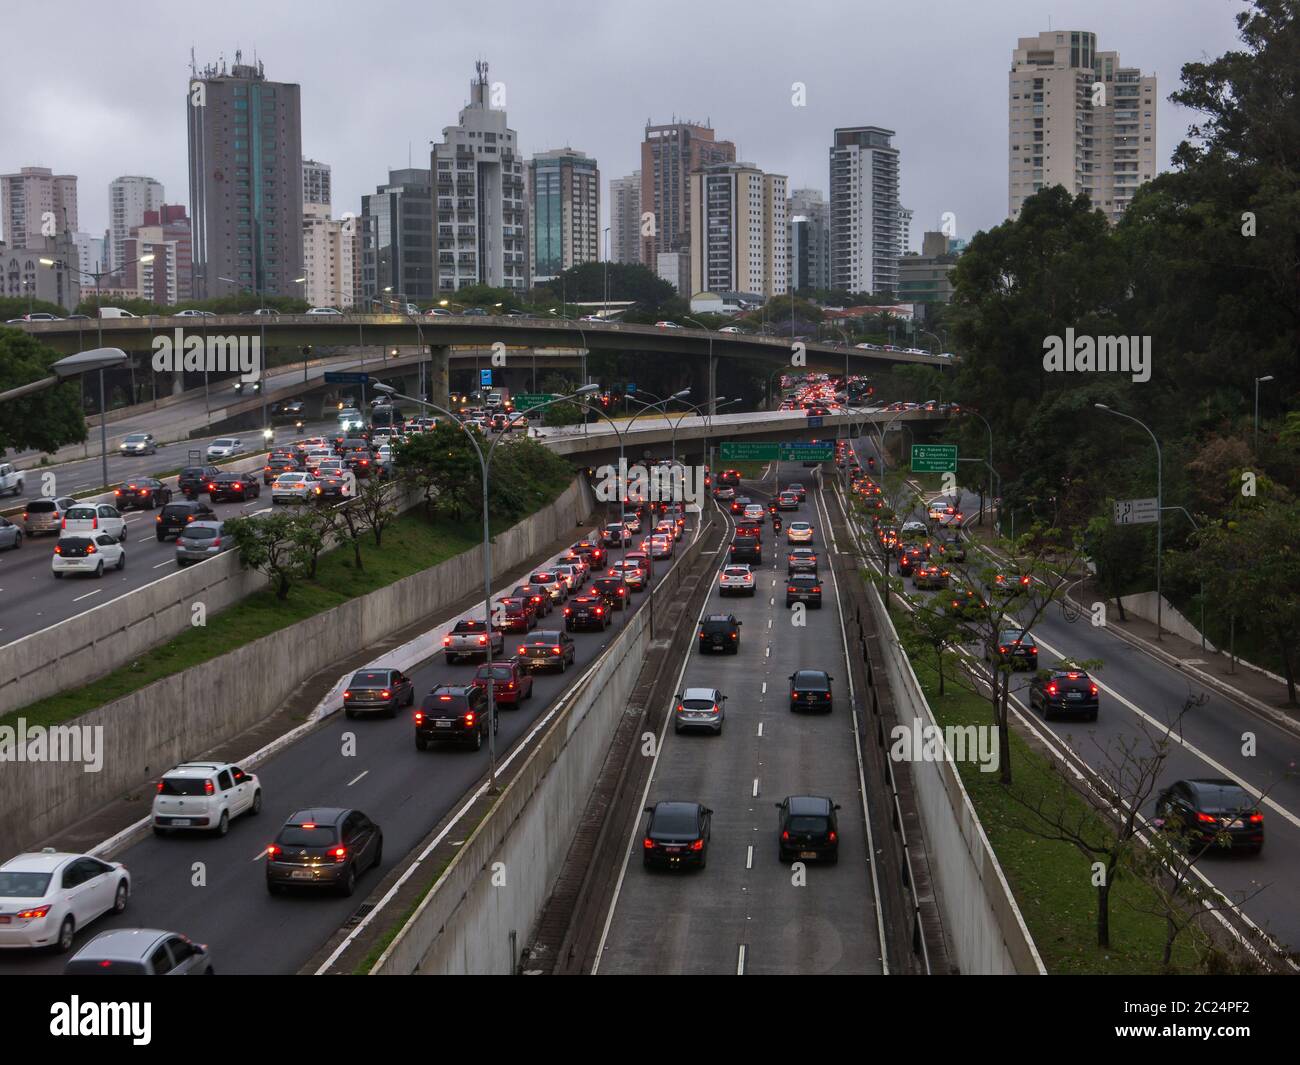 SAO PAULO, BRAZIL - OCT 04, 2018 - Car Traffic on 23 de Maio and Pedro Alvares Cabral avenues in front of Ibirapuera park in a cloudy day at noon Stock Photo